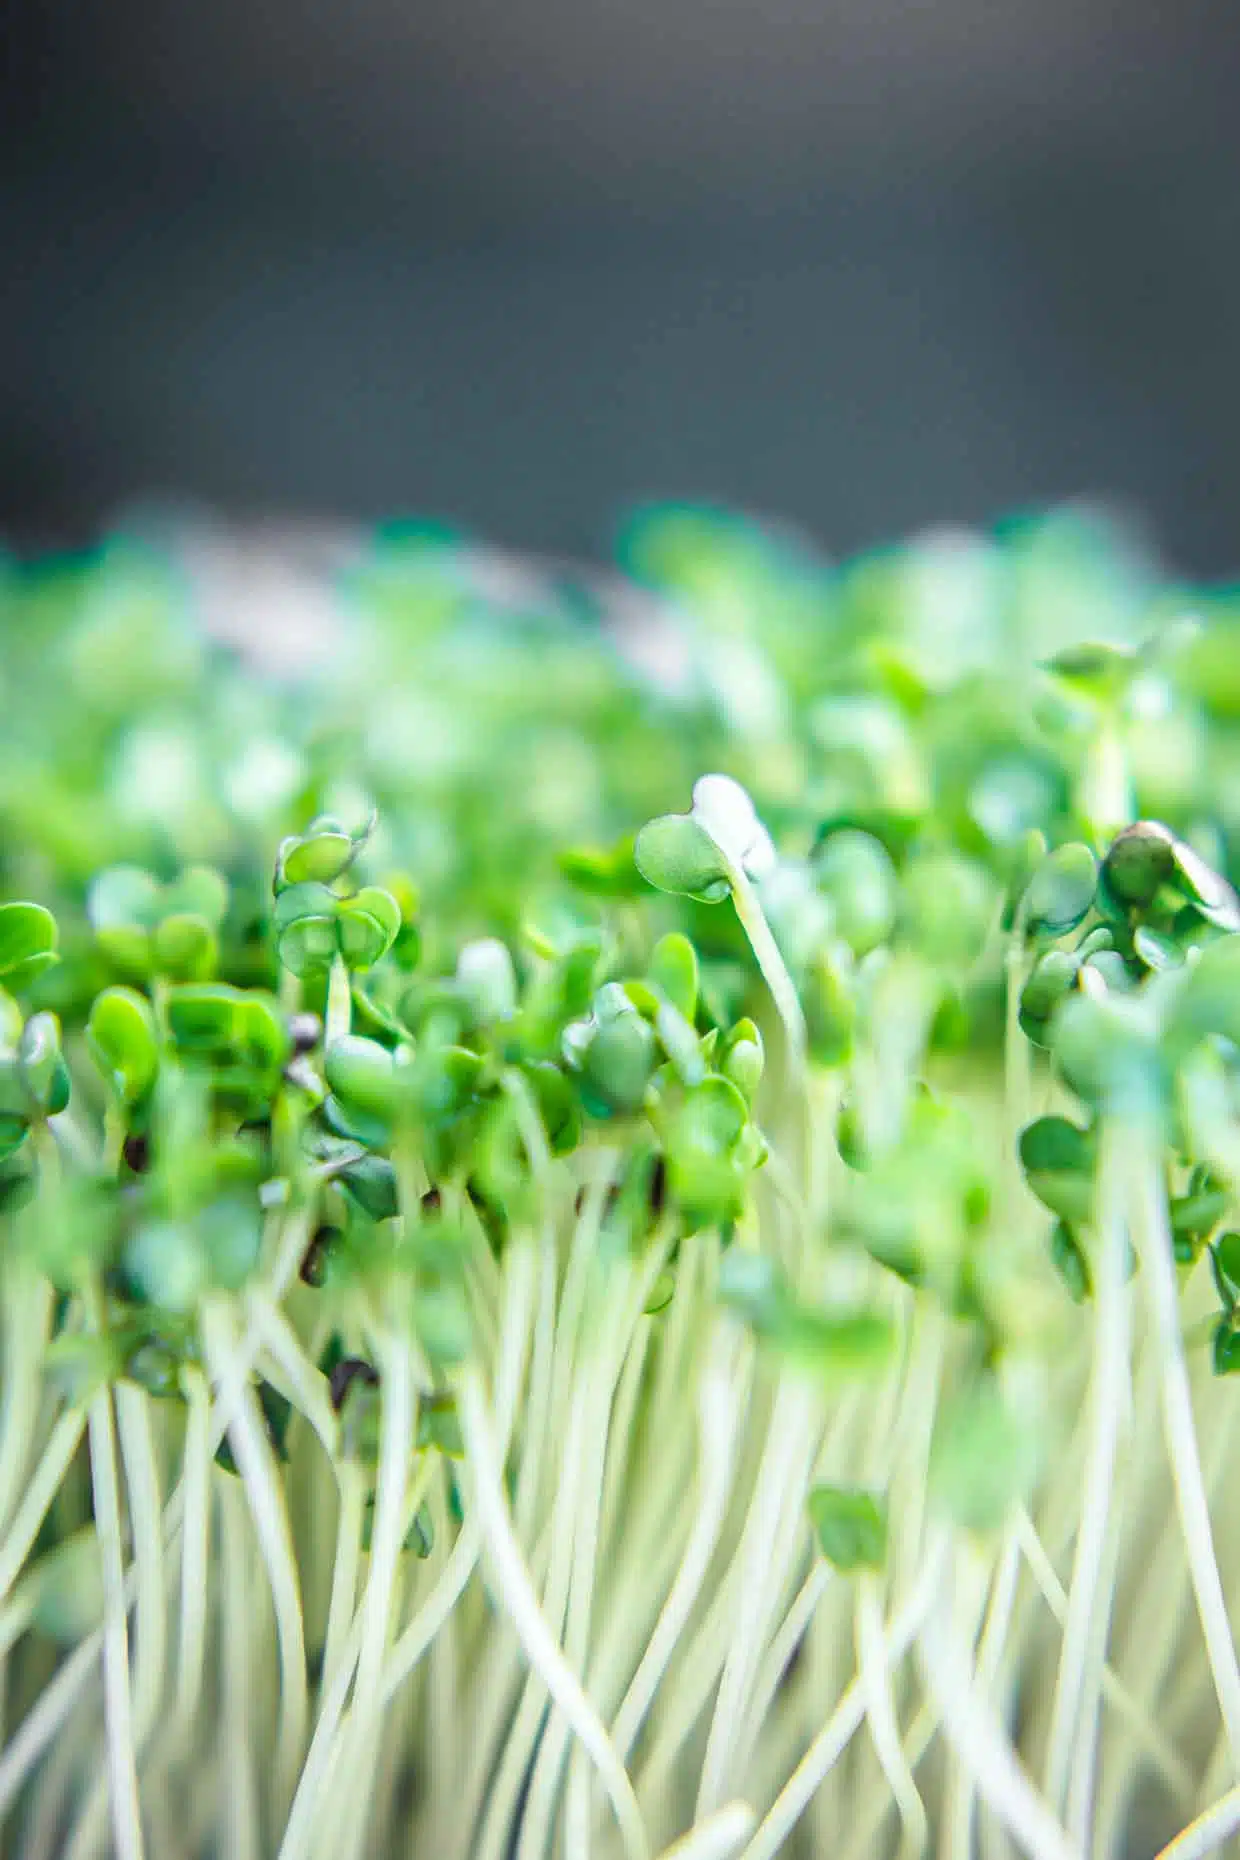 Growing broccoli sprouts close up of greens.